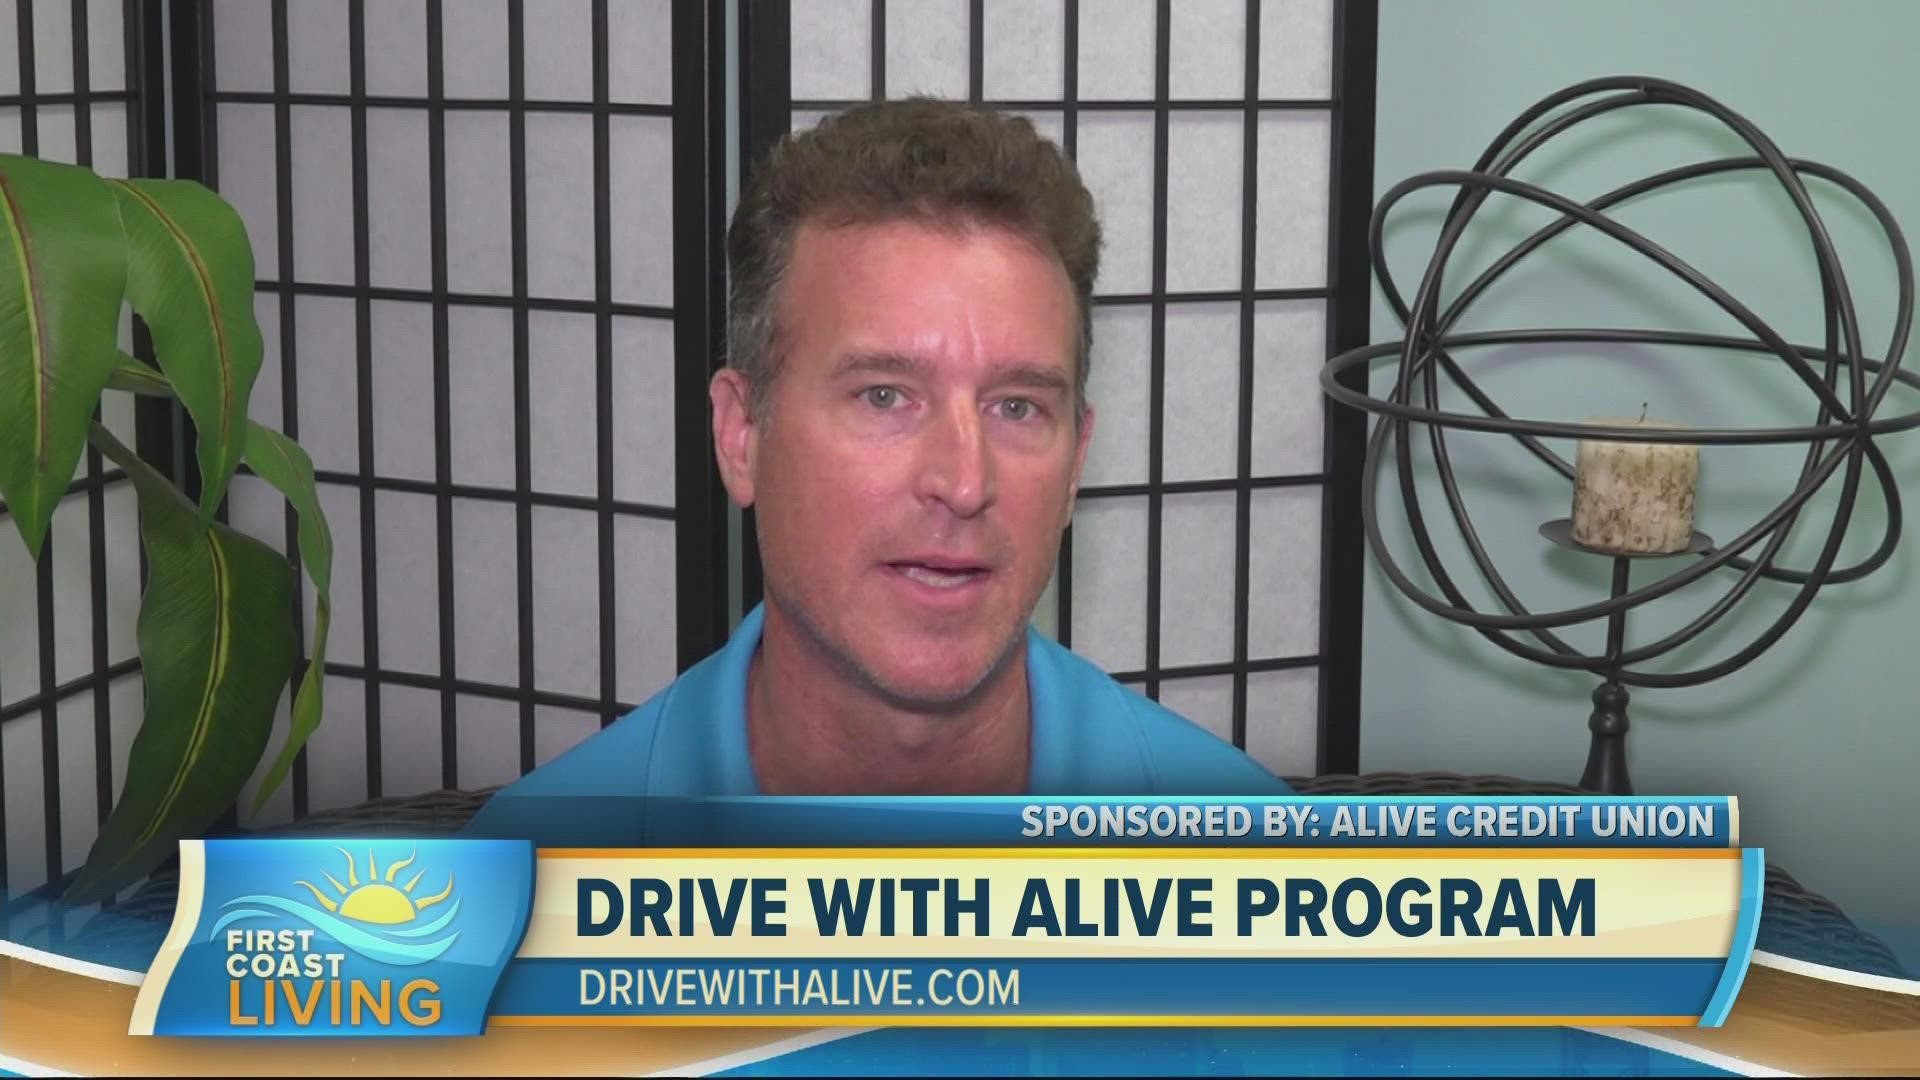 Alive Credit Union's 'Drive Alive Program' offers personalized financial coaching to help establish healthier financial habits.